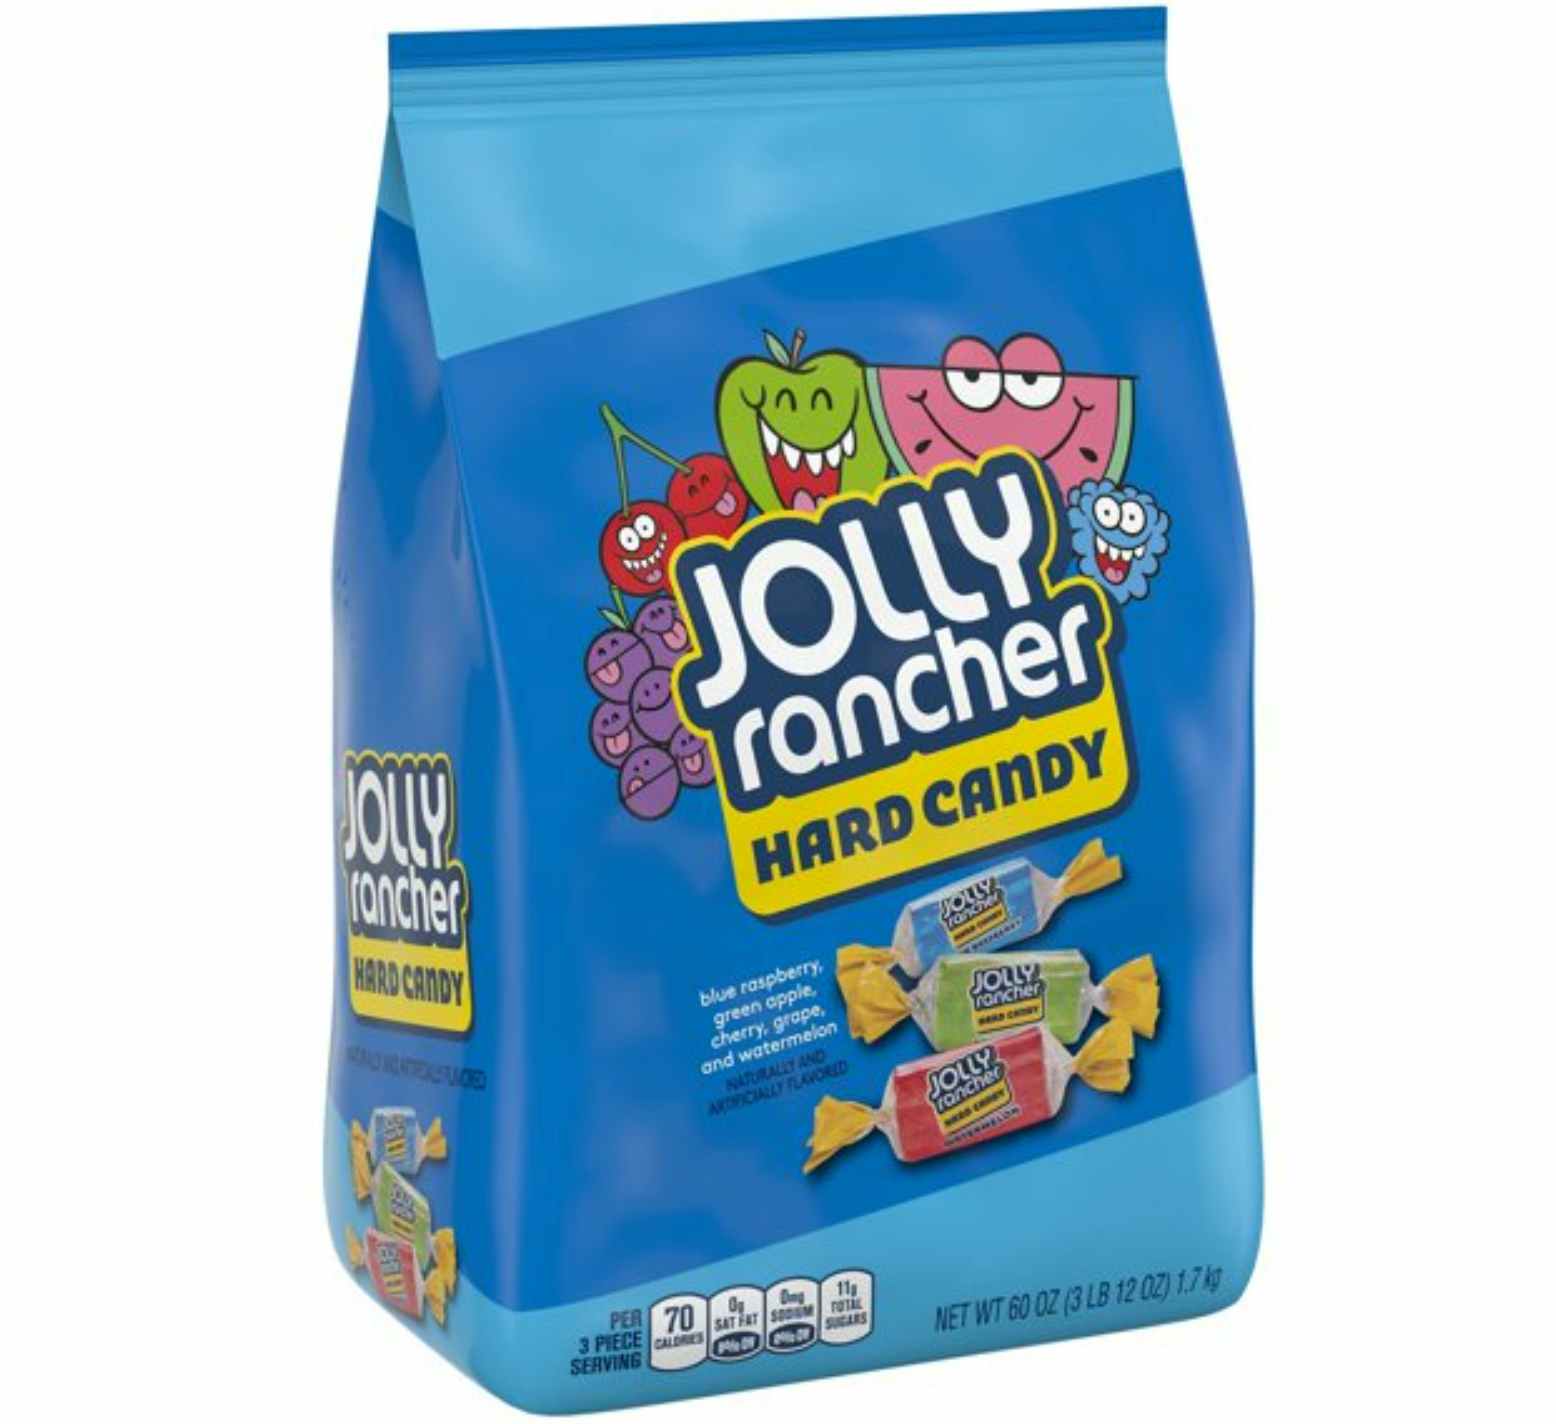 Bag of Jolly Rancher hard candies